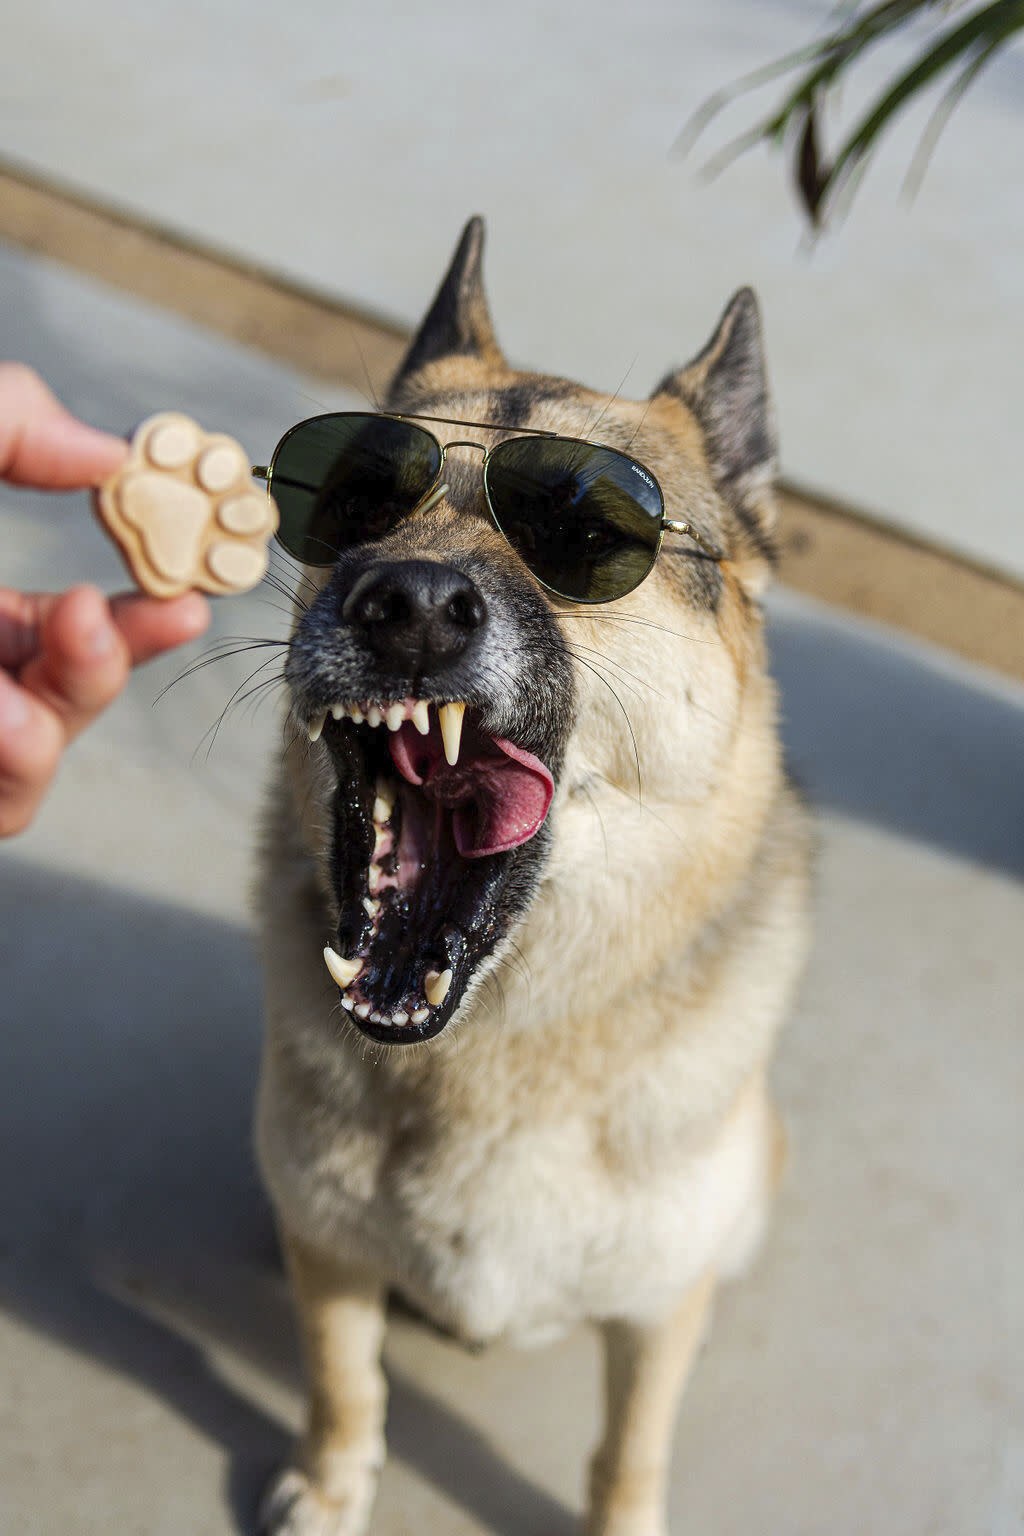 A dog in sunglasses eating a treat